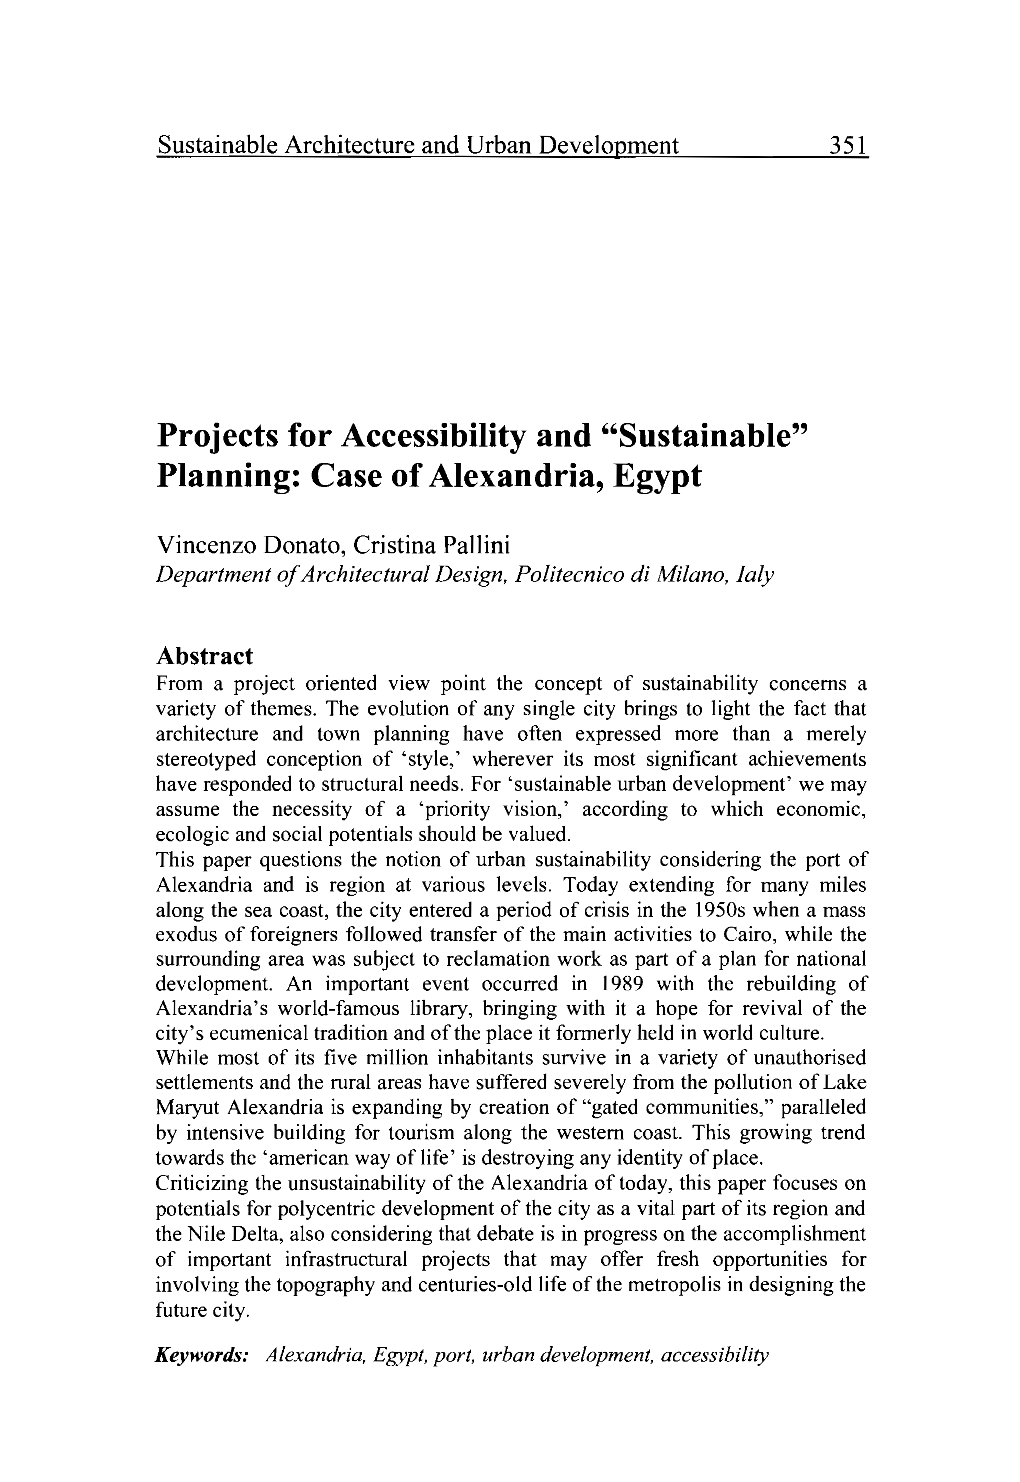 Projects for Accessibility and "Sustainable" Planning: Case of Alexandria, Egypt